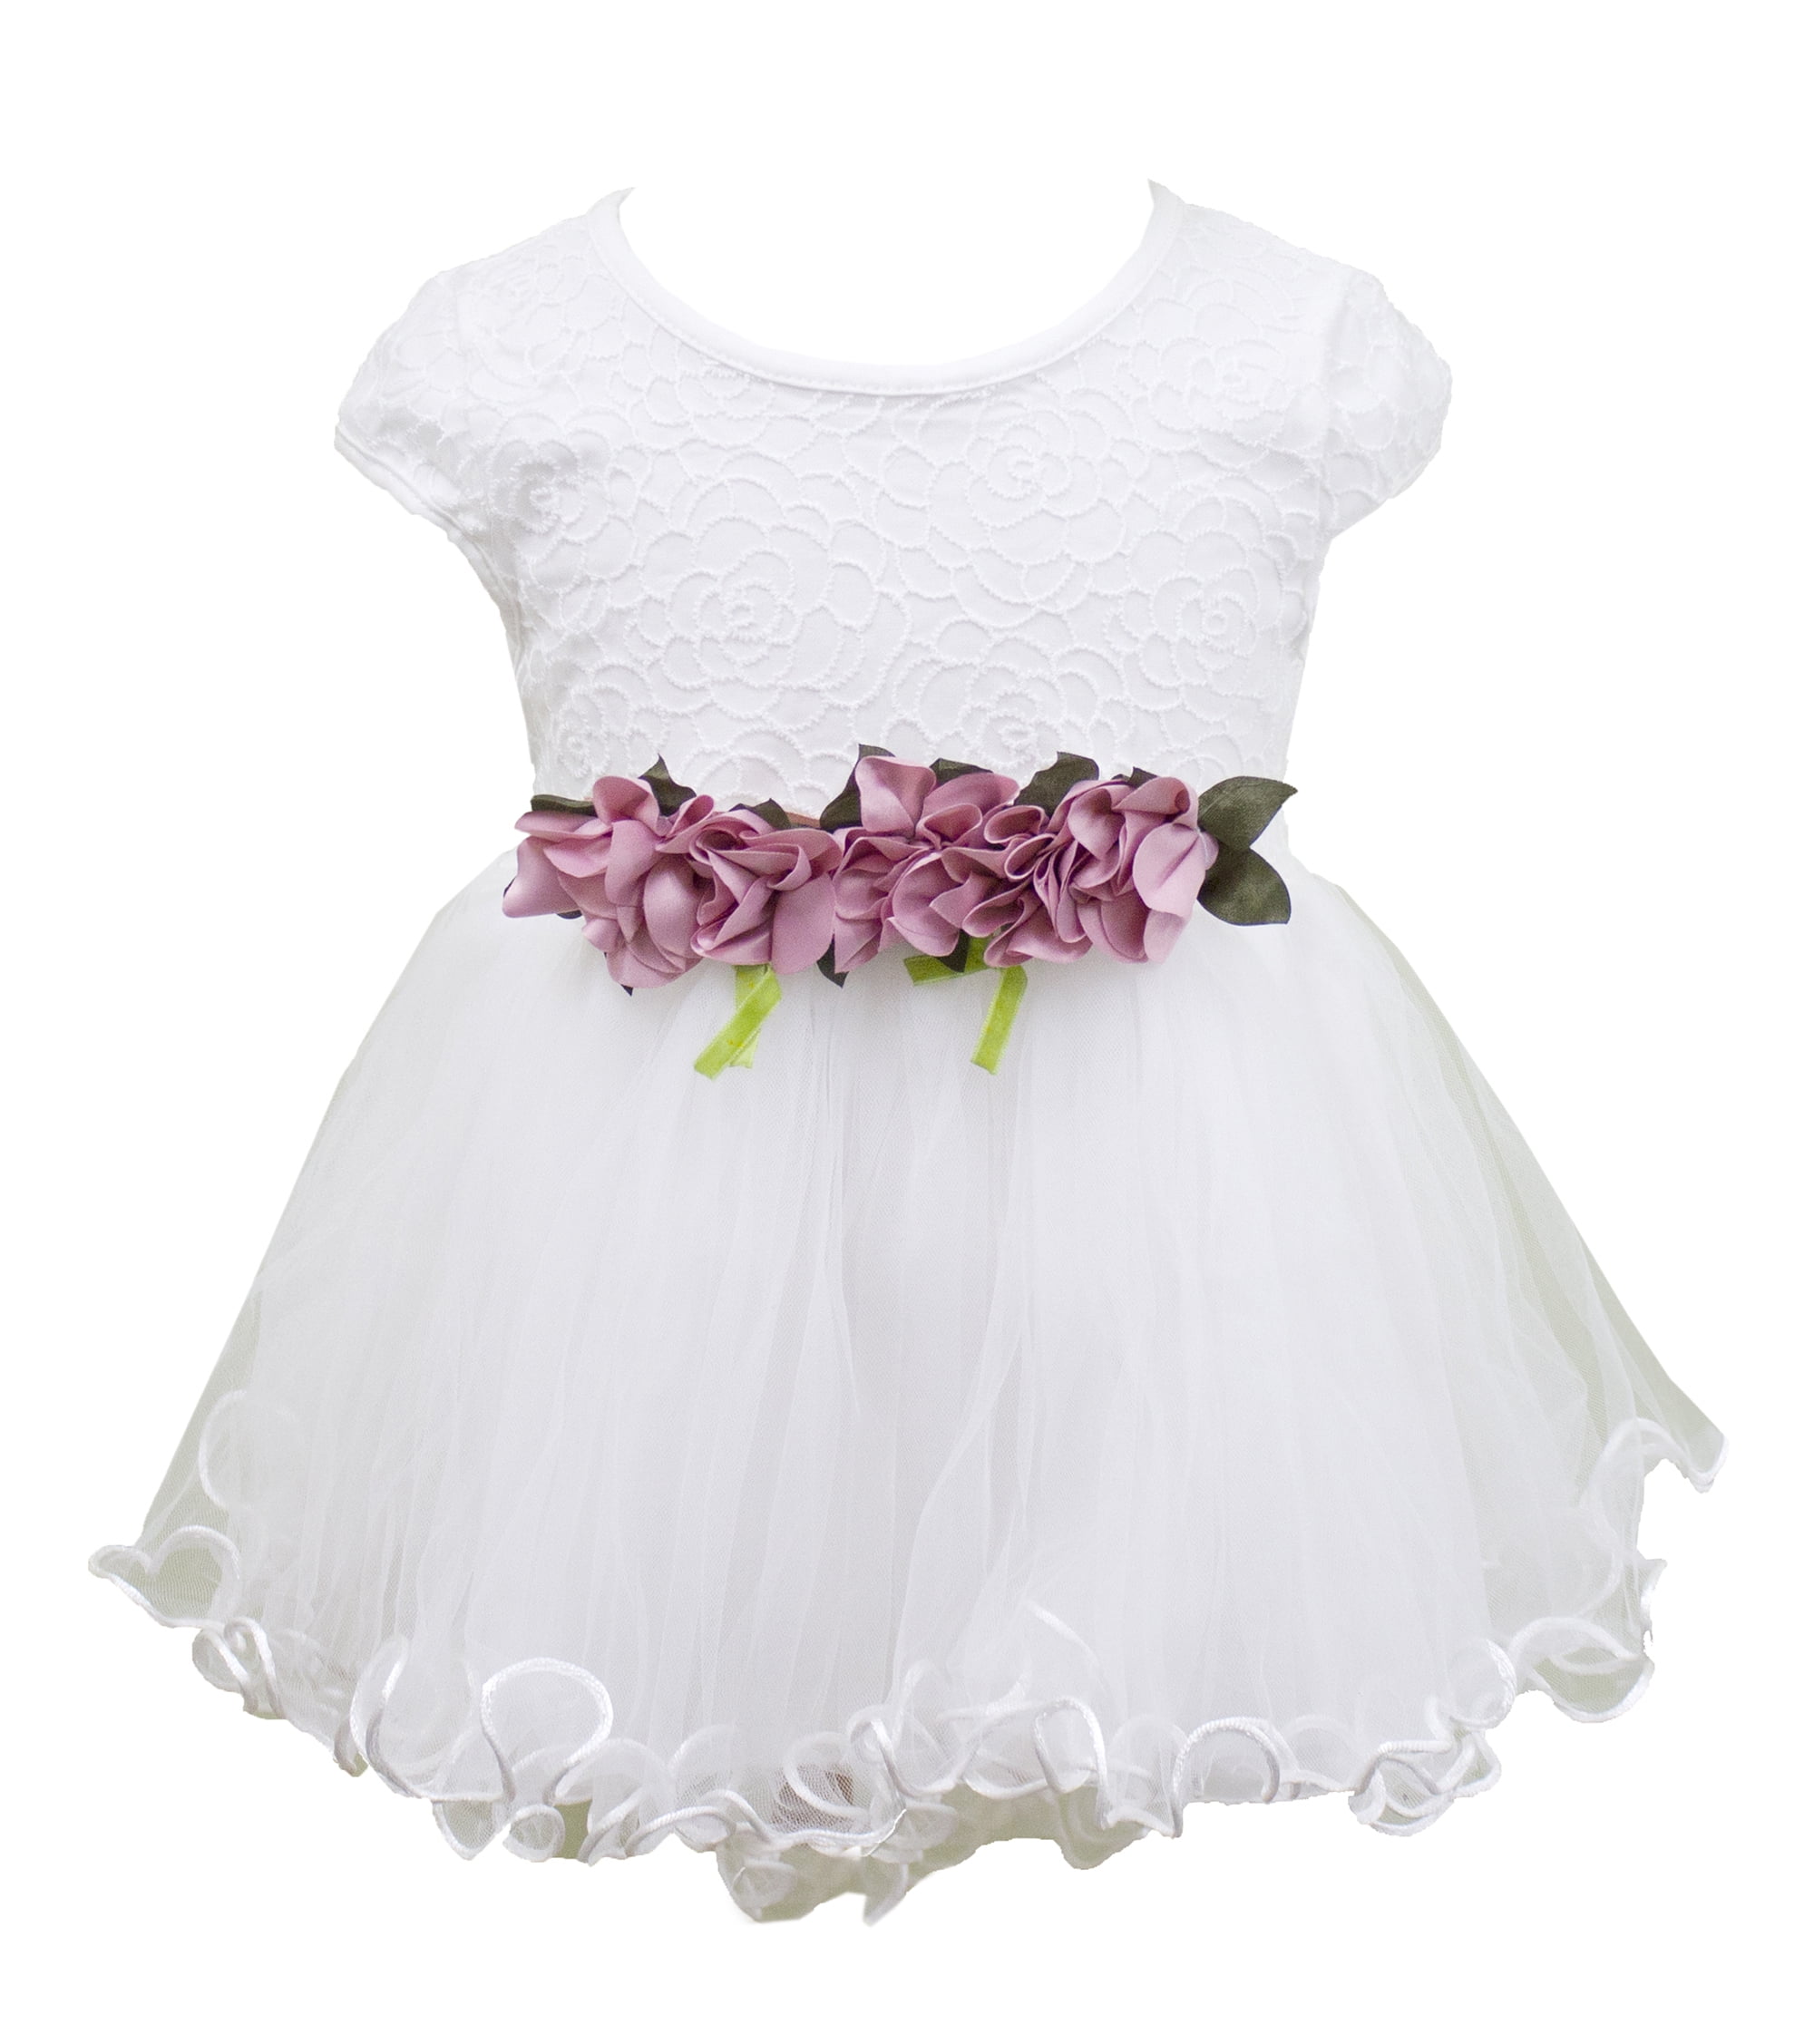 Baby birthday dress | Party wear indian dresses, Baby birthday dress,  Birthday dresses